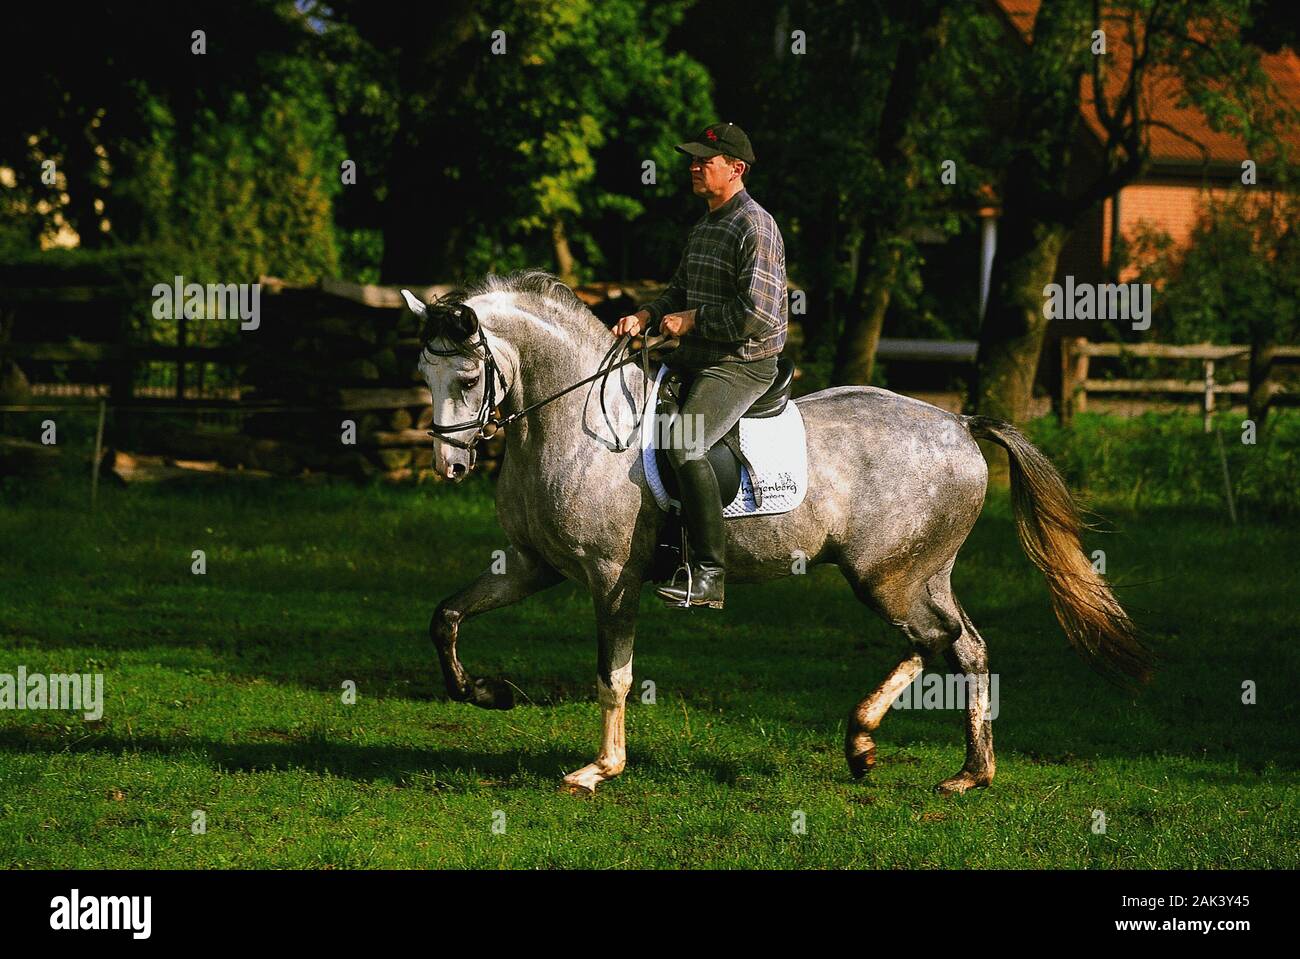 A rider on the horse court Maeyer in Alfhausen in the Osnabrück country, Germany, exercises one of the horses.  (undated picture) | usage worldwide Stock Photo